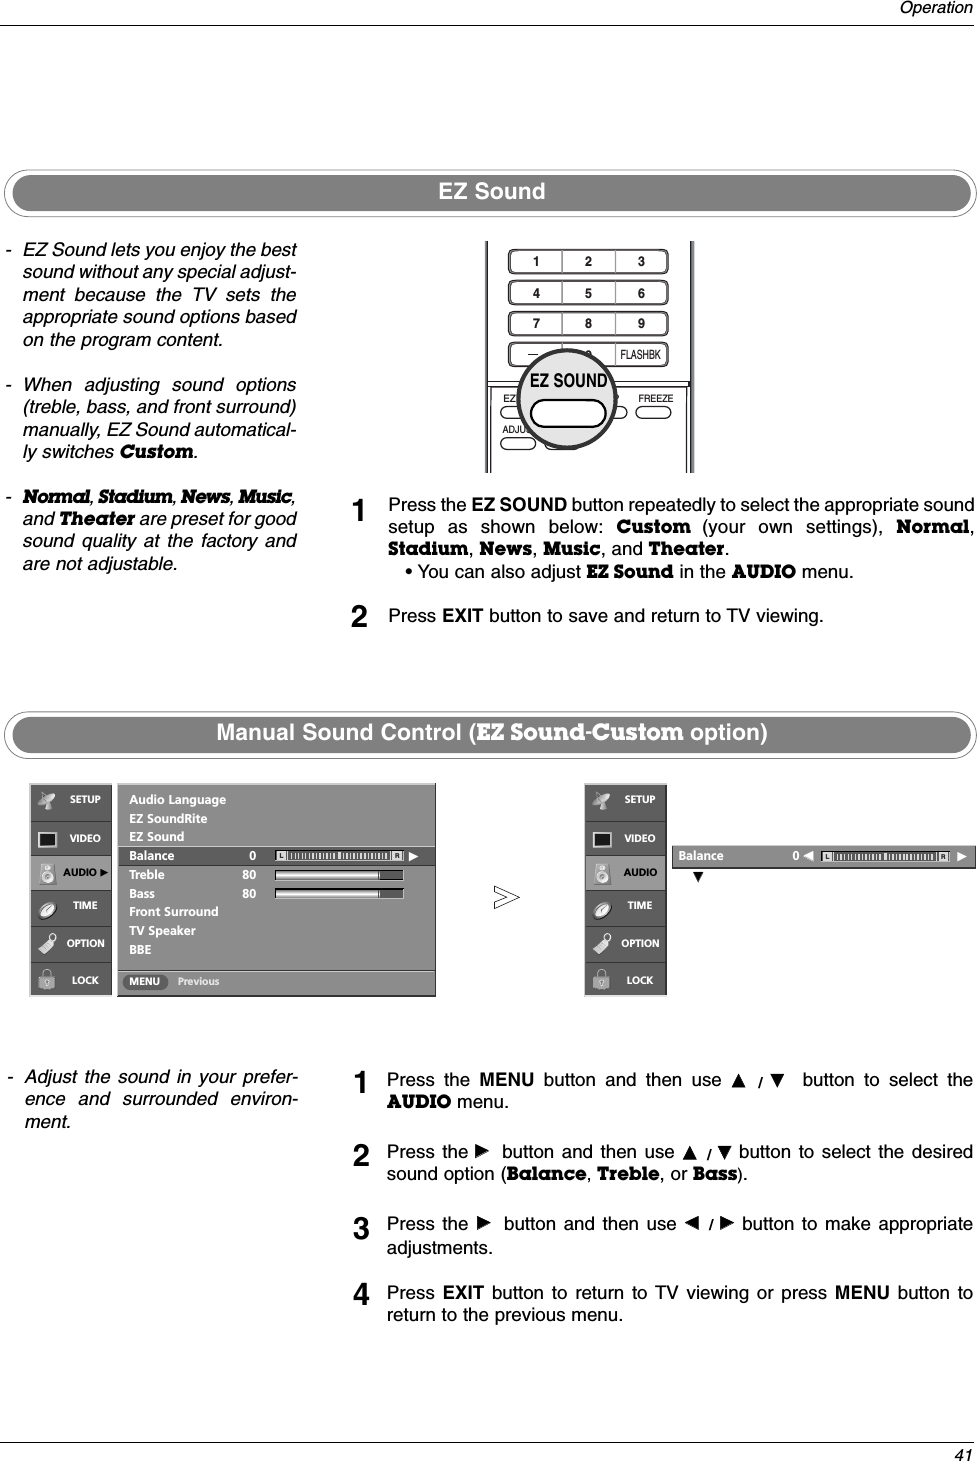 41OperationEZ SoundManual Sound Control (EZ Sound-Custom option)- EZ Sound lets you enjoy the bestsound without any special adjust-ment because the TV sets theappropriate sound options basedon the program content.- When adjusting sound options(treble, bass, and front surround)manually, EZ Sound automatical-ly switches Custom.-Normal, Stadium, News, Music,and Theater are preset for goodsound quality at the factory andare not adjustable.- Adjust the sound in your prefer-ence and surrounded environ-ment. Press the EZ SOUND button repeatedly to select the appropriate soundsetup as shown below: Custom  (your own settings), Normal,Stadium, News, Music, and Theater.• You can also adjust EZ Sound in the AUDIO menu.Press EXIT button to save and return to TV viewing.12Press the MENU button and then use DD /  EEbutton to select theAUDIO menu.Press the GGbutton and then use DD /  EEbutton to select the desiredsound option (Balance,Treble, or Bass). Press the GGbutton and then use FF / GGbutton to make appropriateadjustments.Press  EXIT  button to return to TV viewing or press MENU button toreturn to the previous menu.1234PreviousMENUAudio LanguageEZ SoundRiteEZ SoundBalance 0 GTreble 80Bass 80Front SurroundTV SpeakerBBEL REEBalance                  0 FF                         GL RSETUPVIDEOAUDIO GTIMEOPTIONLOCKSETUPVIDEOAUDIOTIMEOPTIONLOCK1 2 3     4 5 6    7809   APMADJUSTSAPEZ SOUNDEZ PICFREEZEFLASHBKEZ SOUND